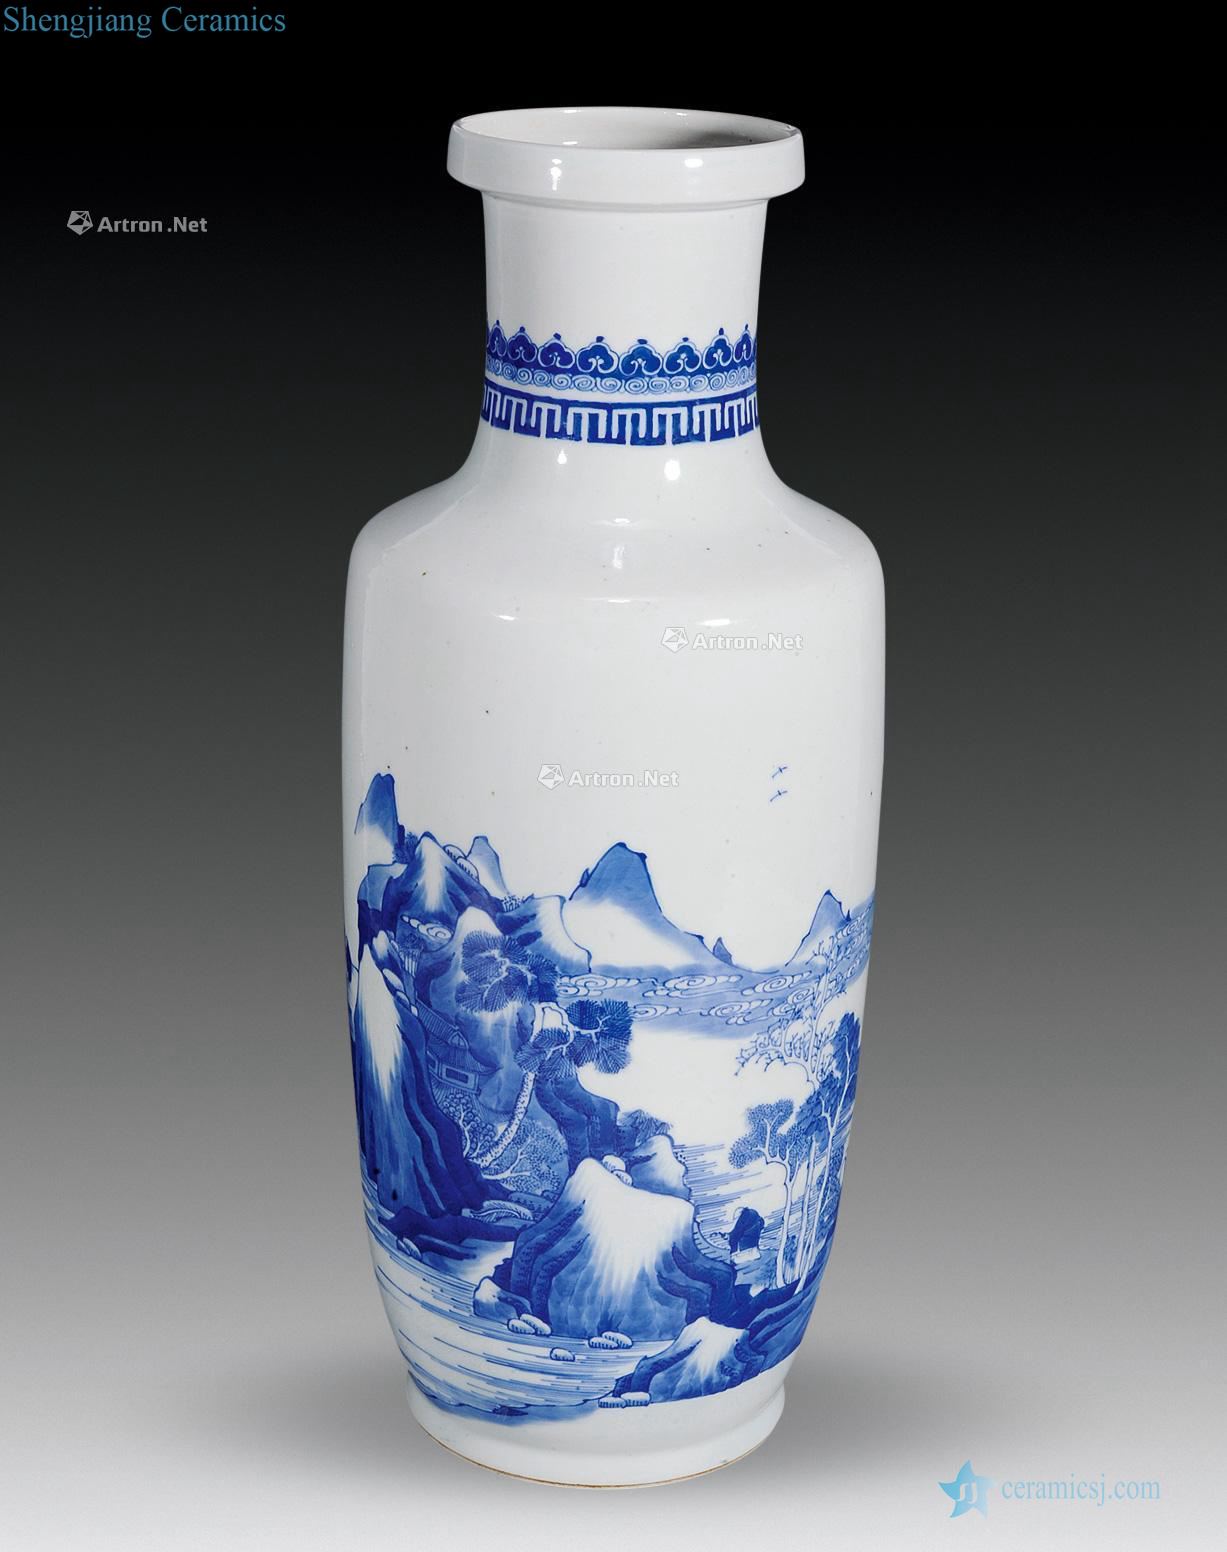 In the 18th century "Blue and white landscape view fish were bottles